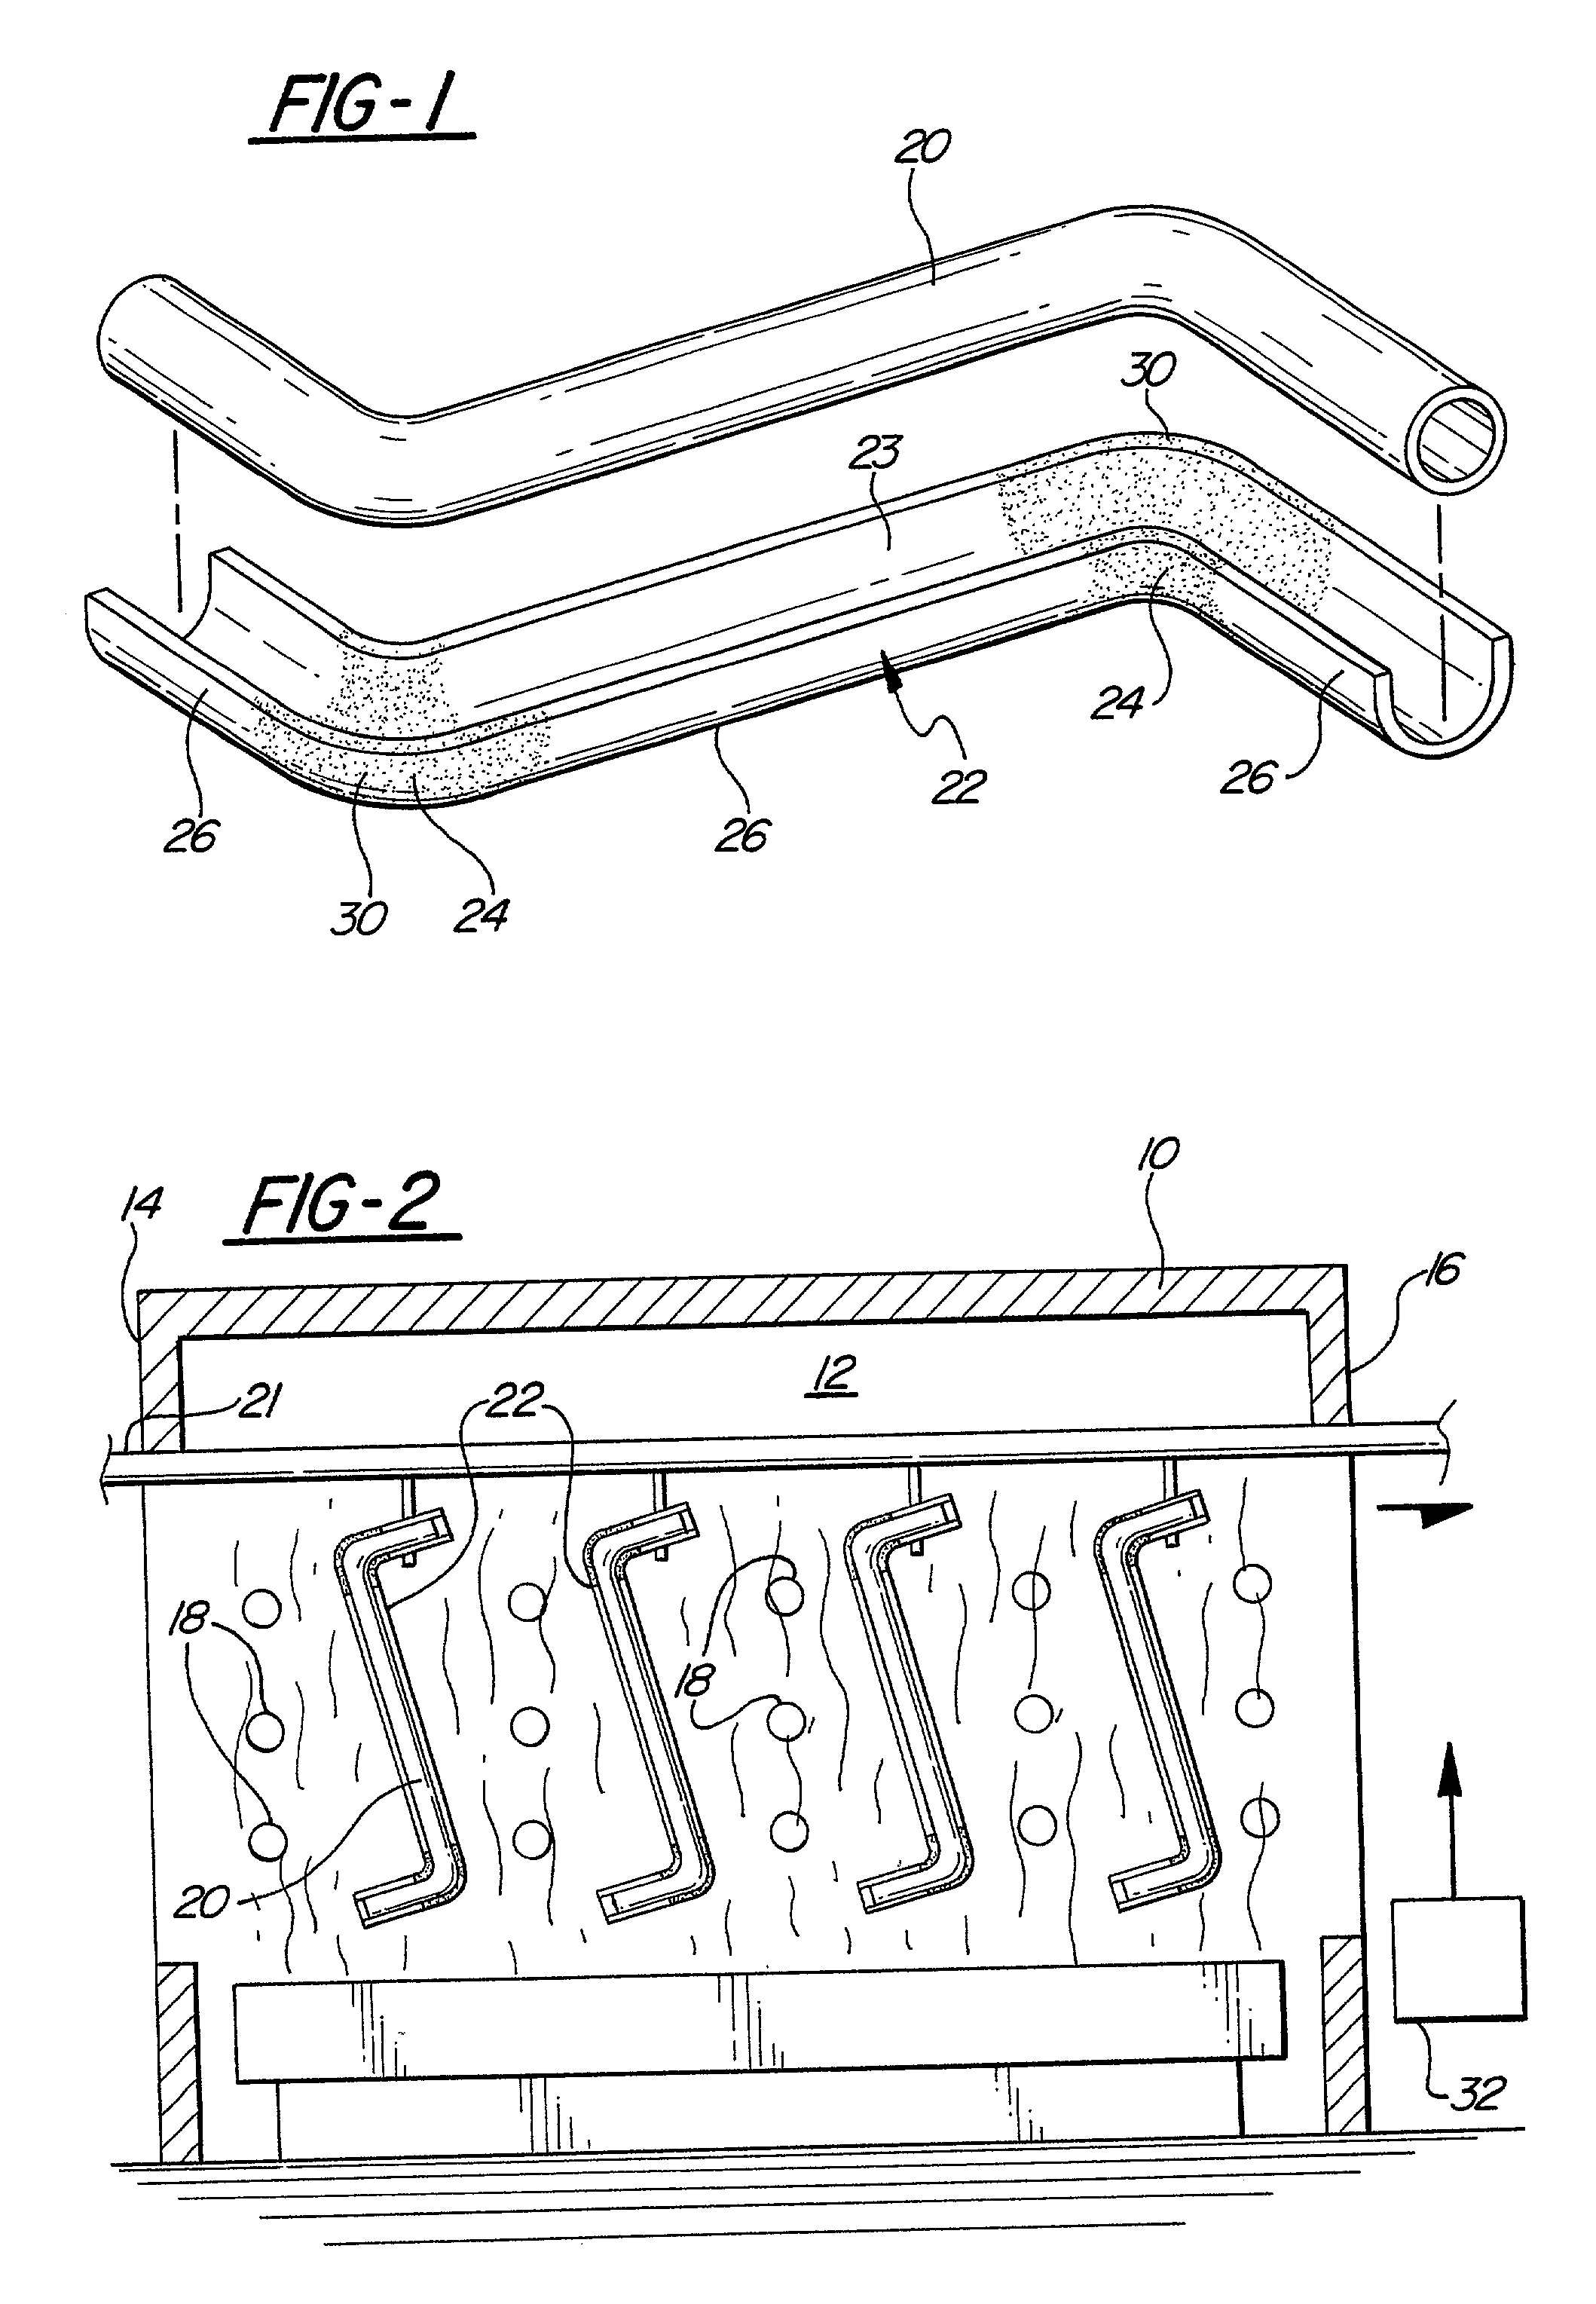 Apparatus for thermosetting thermoplastic tubes